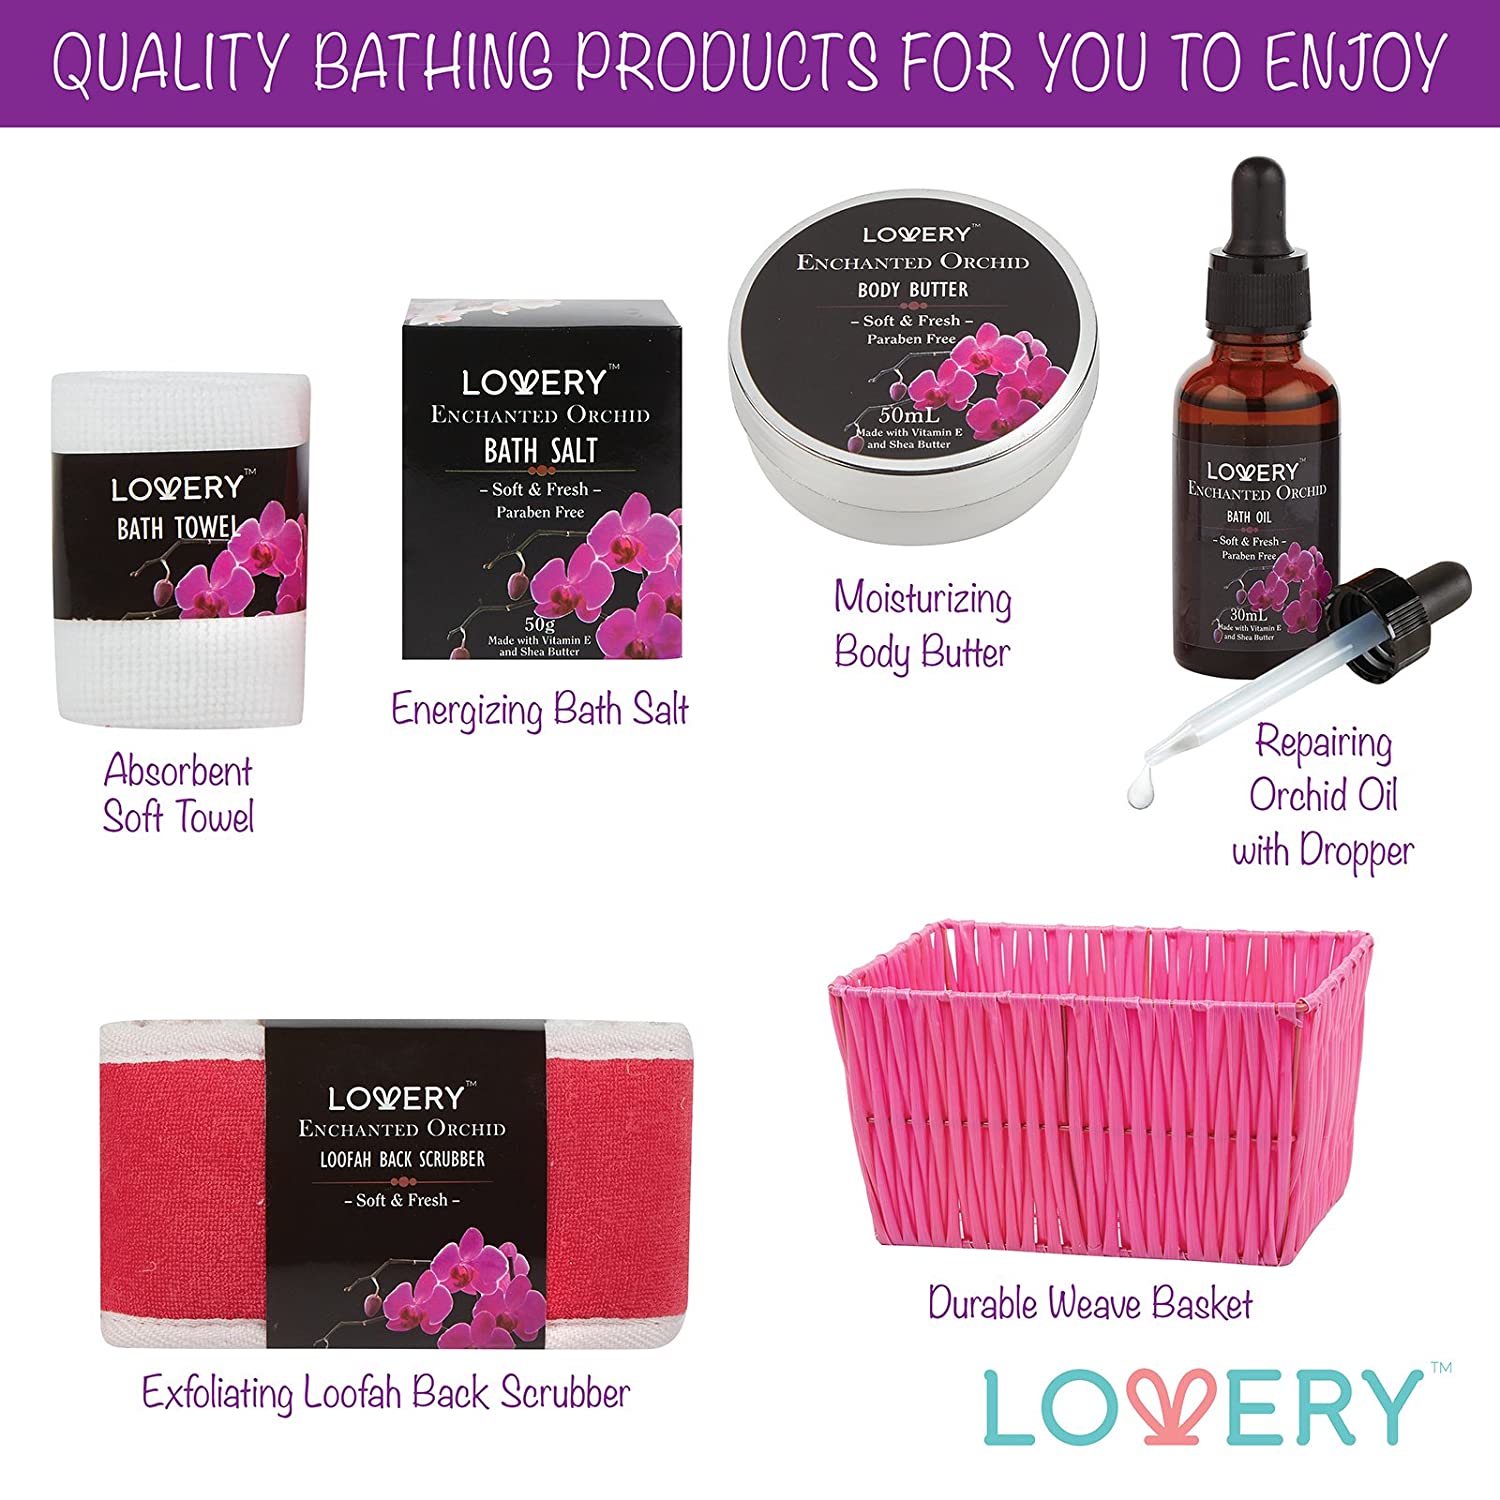 Lovery Enchanted Orchid Gift Basket, Orchid Gift Set, Enchanted Orchid Bath and Body Gift Basket, Orchid Body Kit, Bath and Body Cosmetics, All Natural, Vitamin E, Shea Butter, Self-Care Package, Hydrating Skin Care, Gift Bath Set, Perfect Gift, Spa Set 